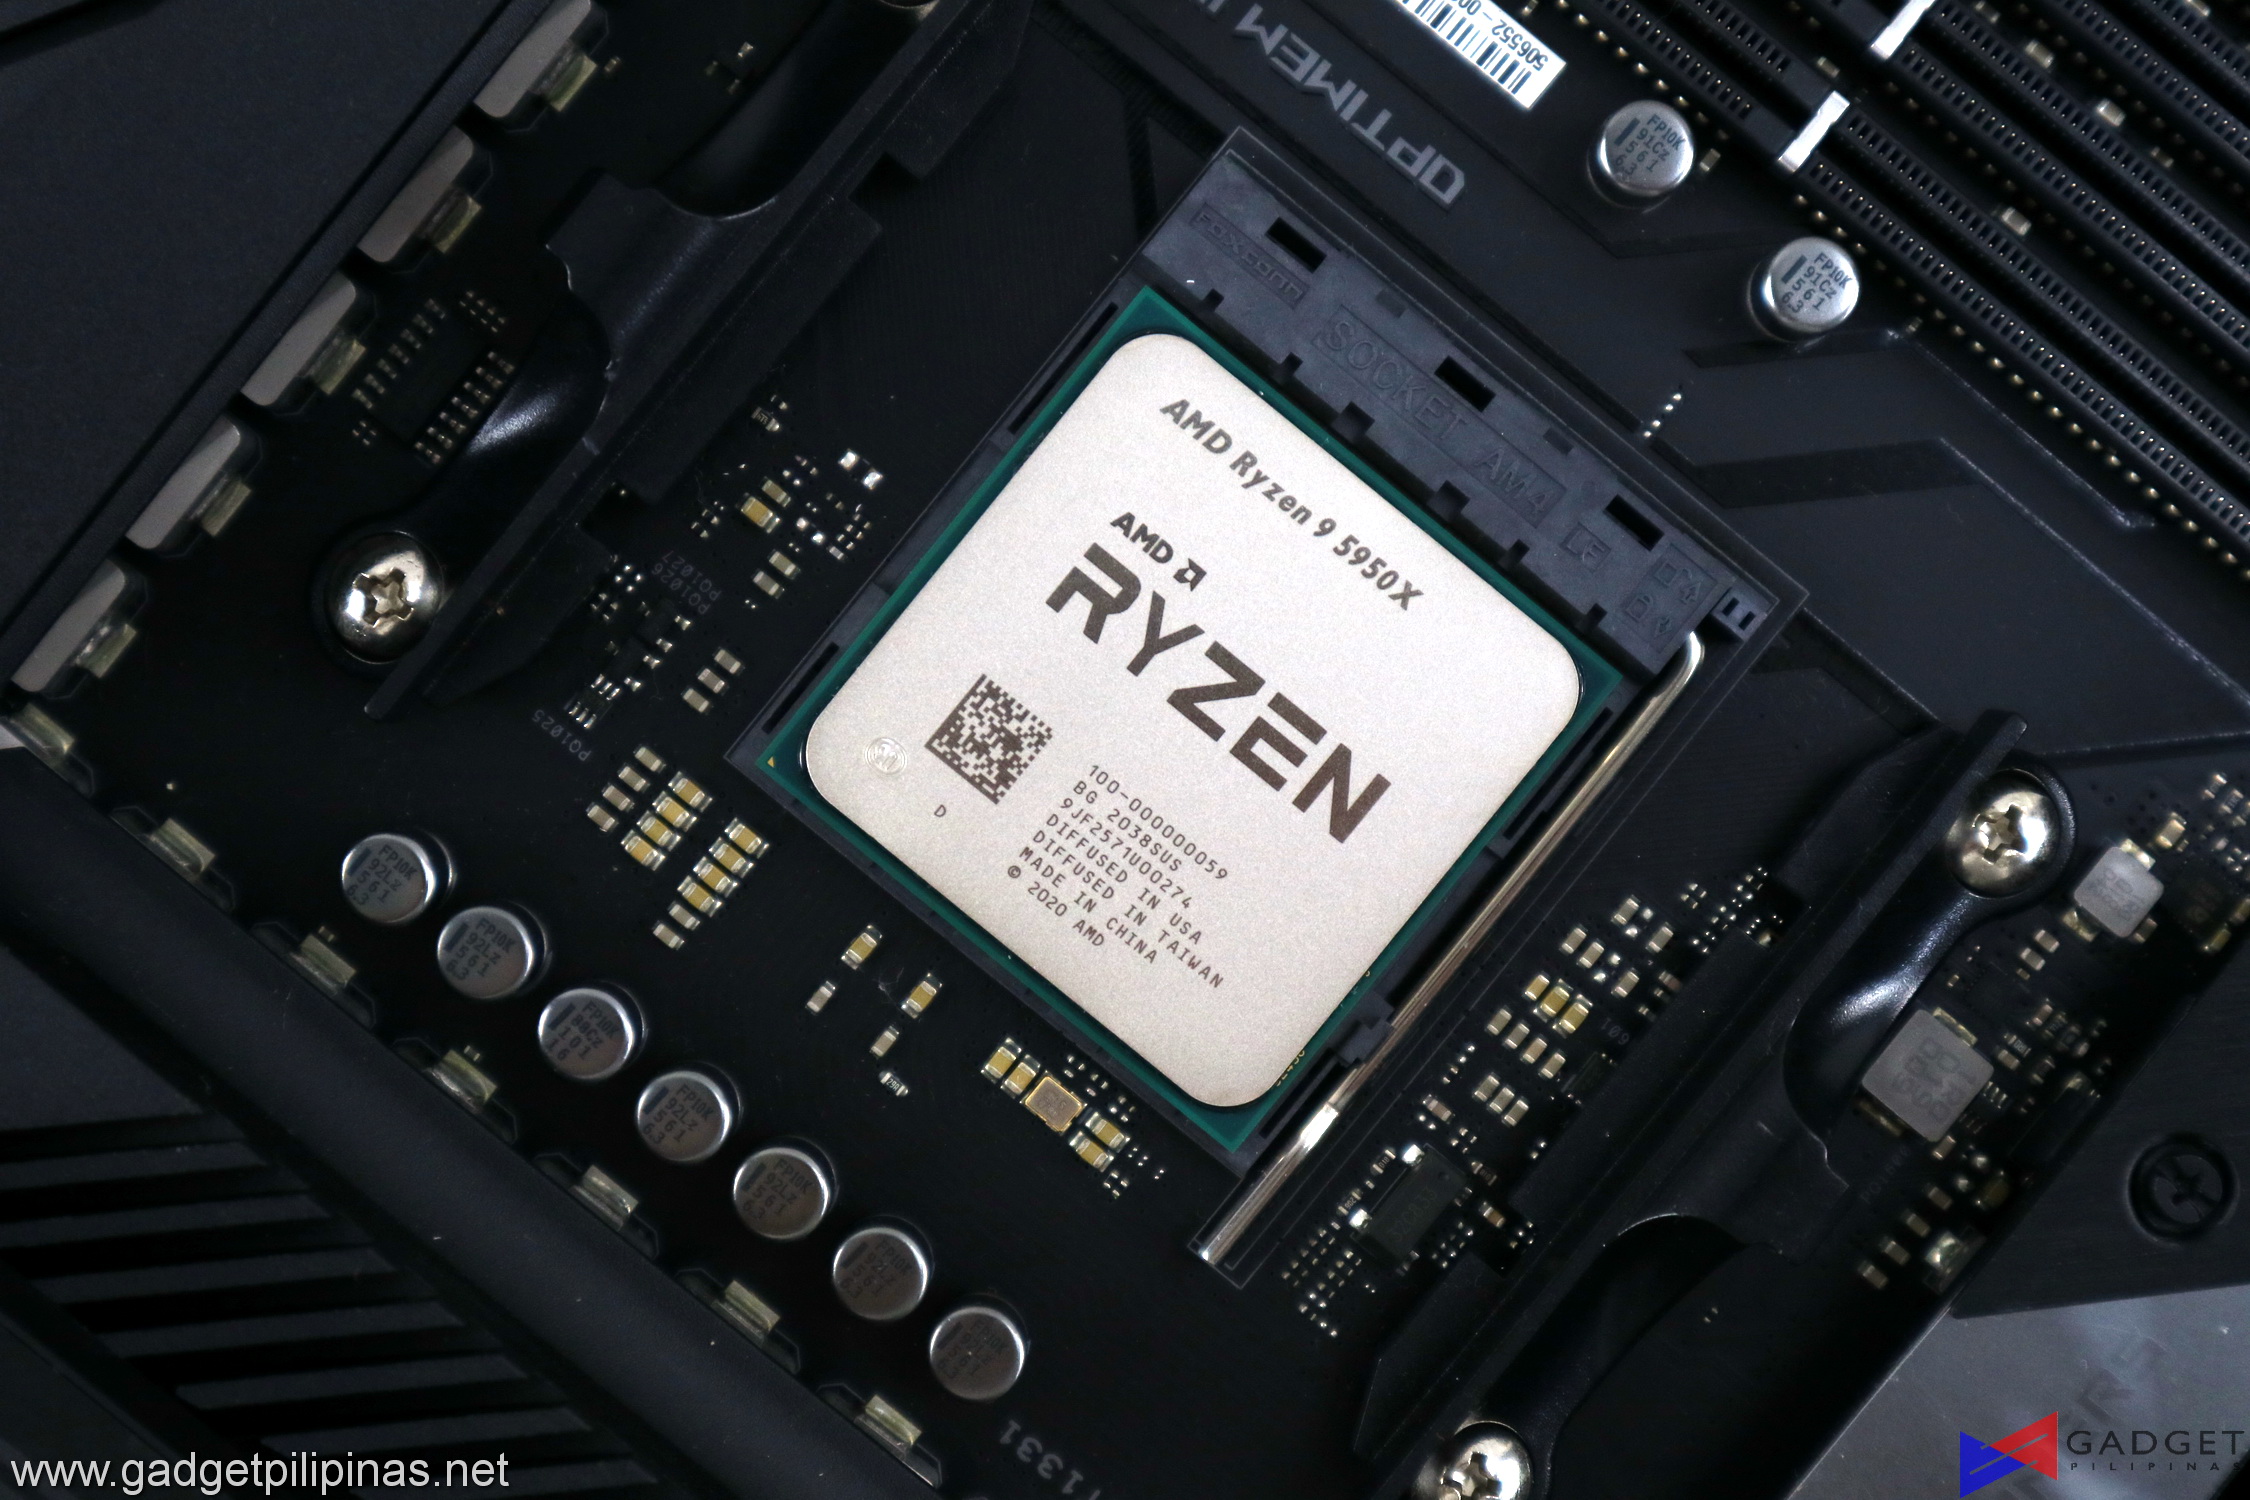 AMD Ryzen 9 5950X Processor Review - Simply the Fastest Gaming and